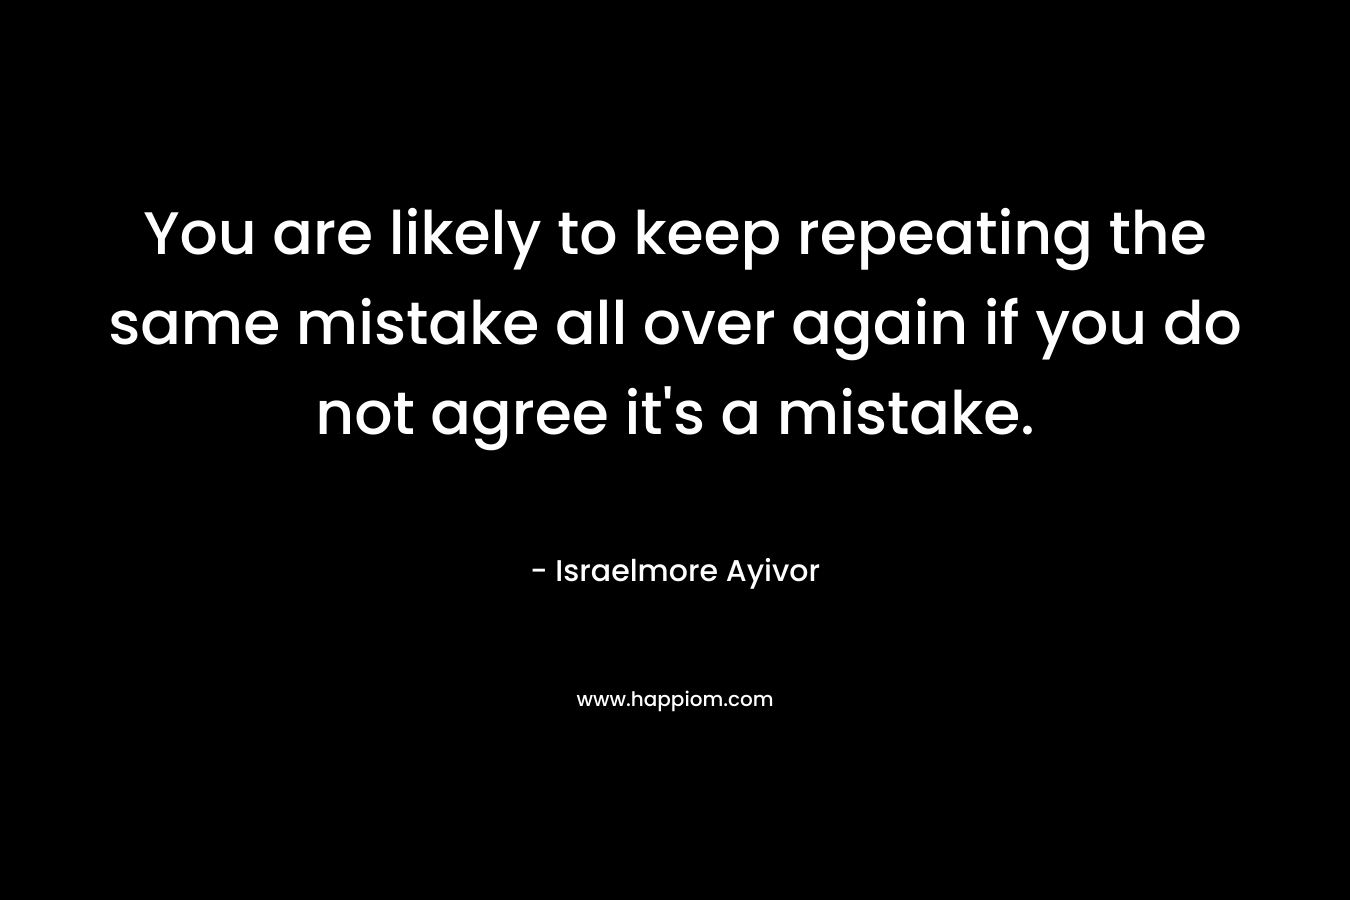 You are likely to keep repeating the same mistake all over again if you do not agree it's a mistake.